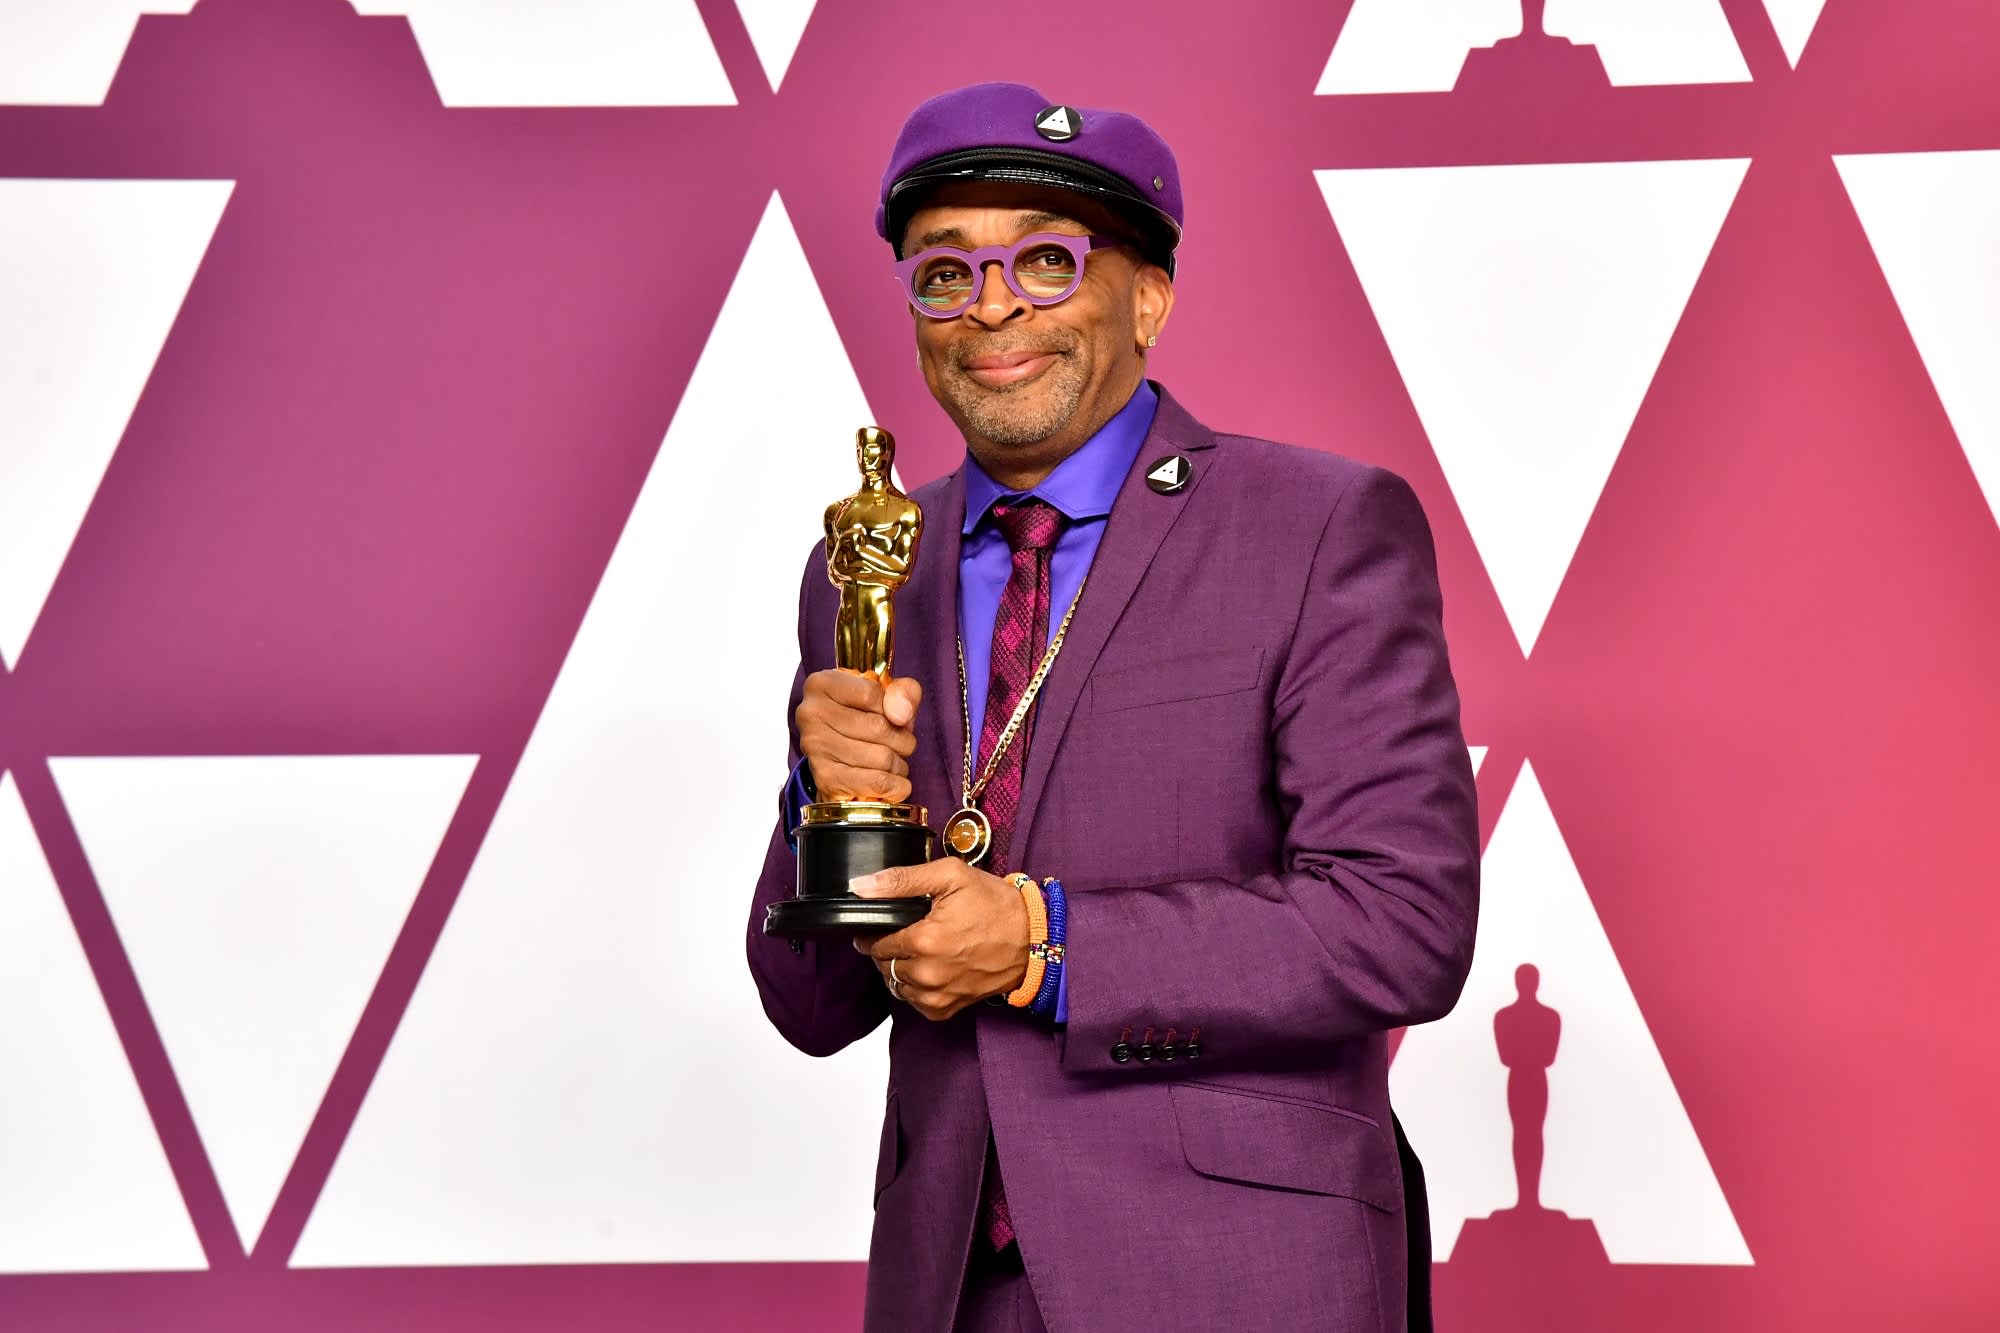 Spike Lee wins his first Oscar, 30 years after 'Do the Right Thing